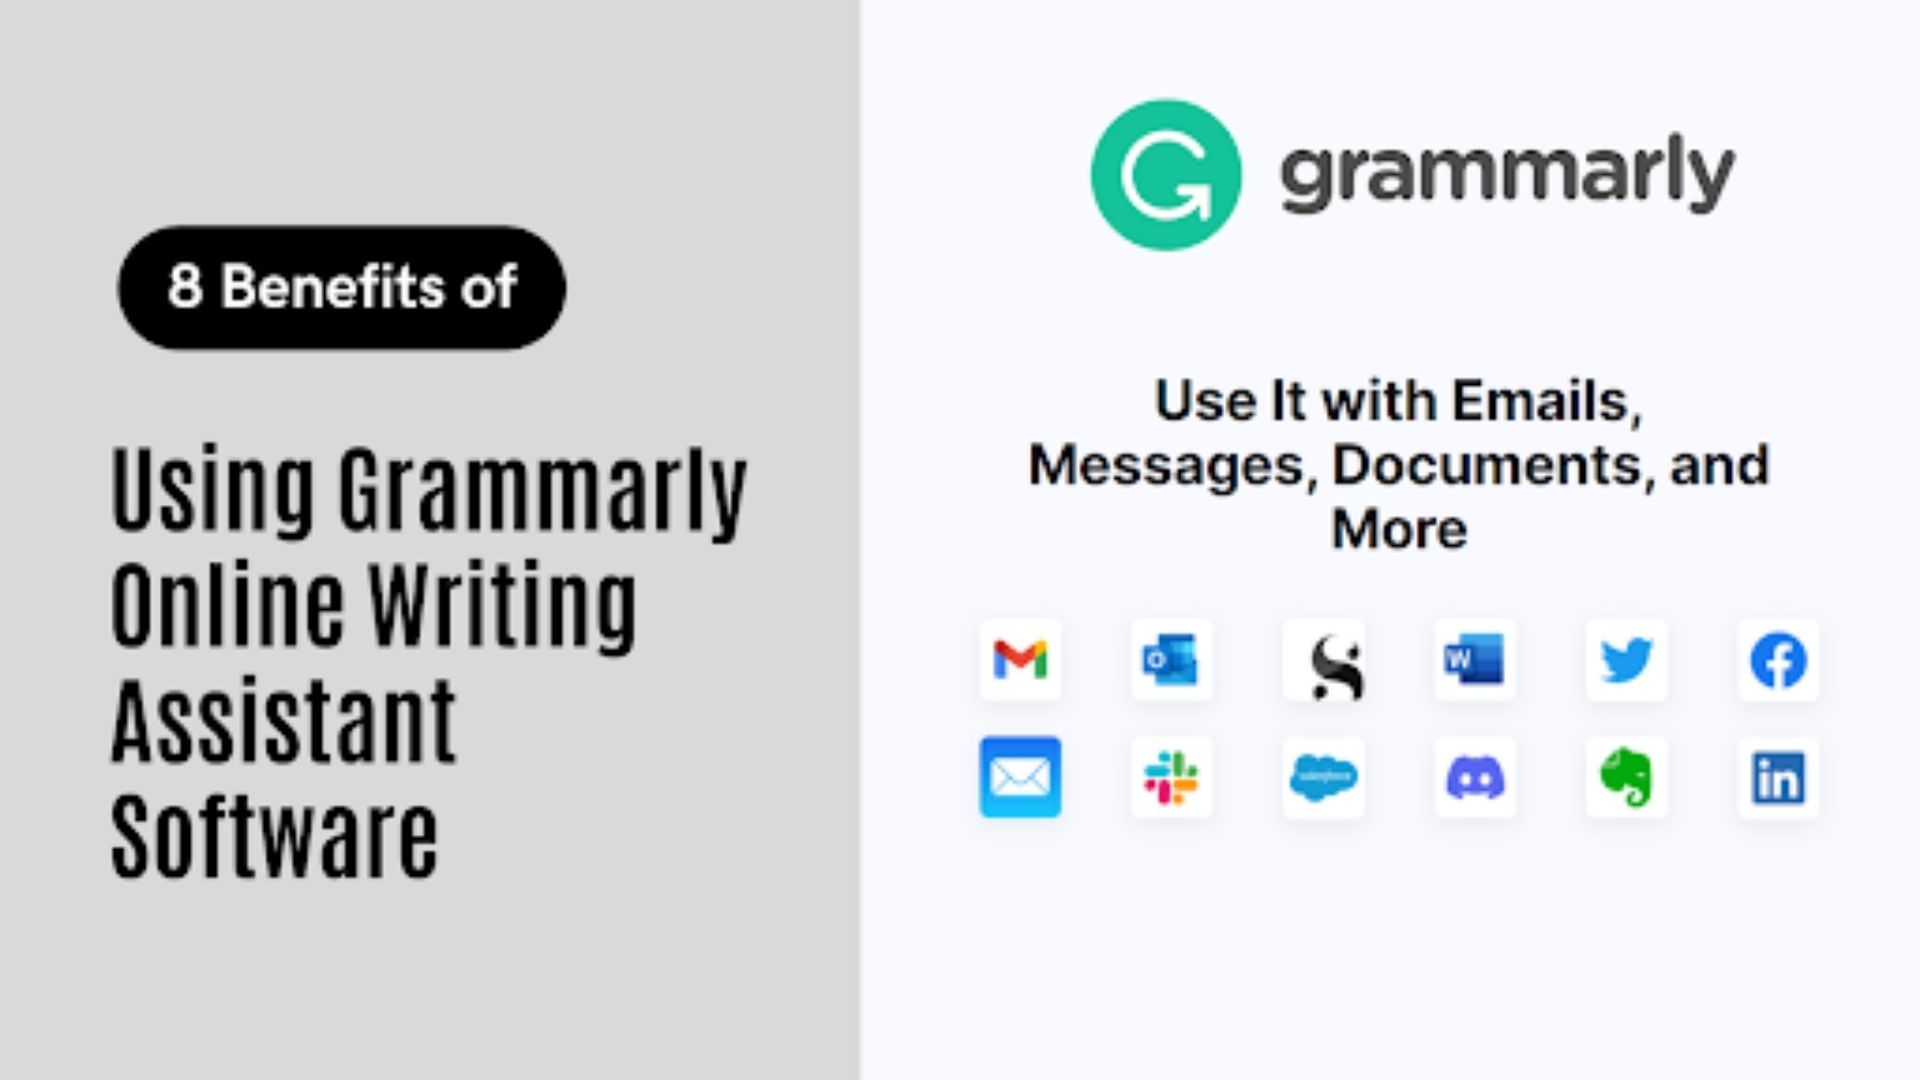 8 Benefits of Using Grammarly Online Writing Assistant Software